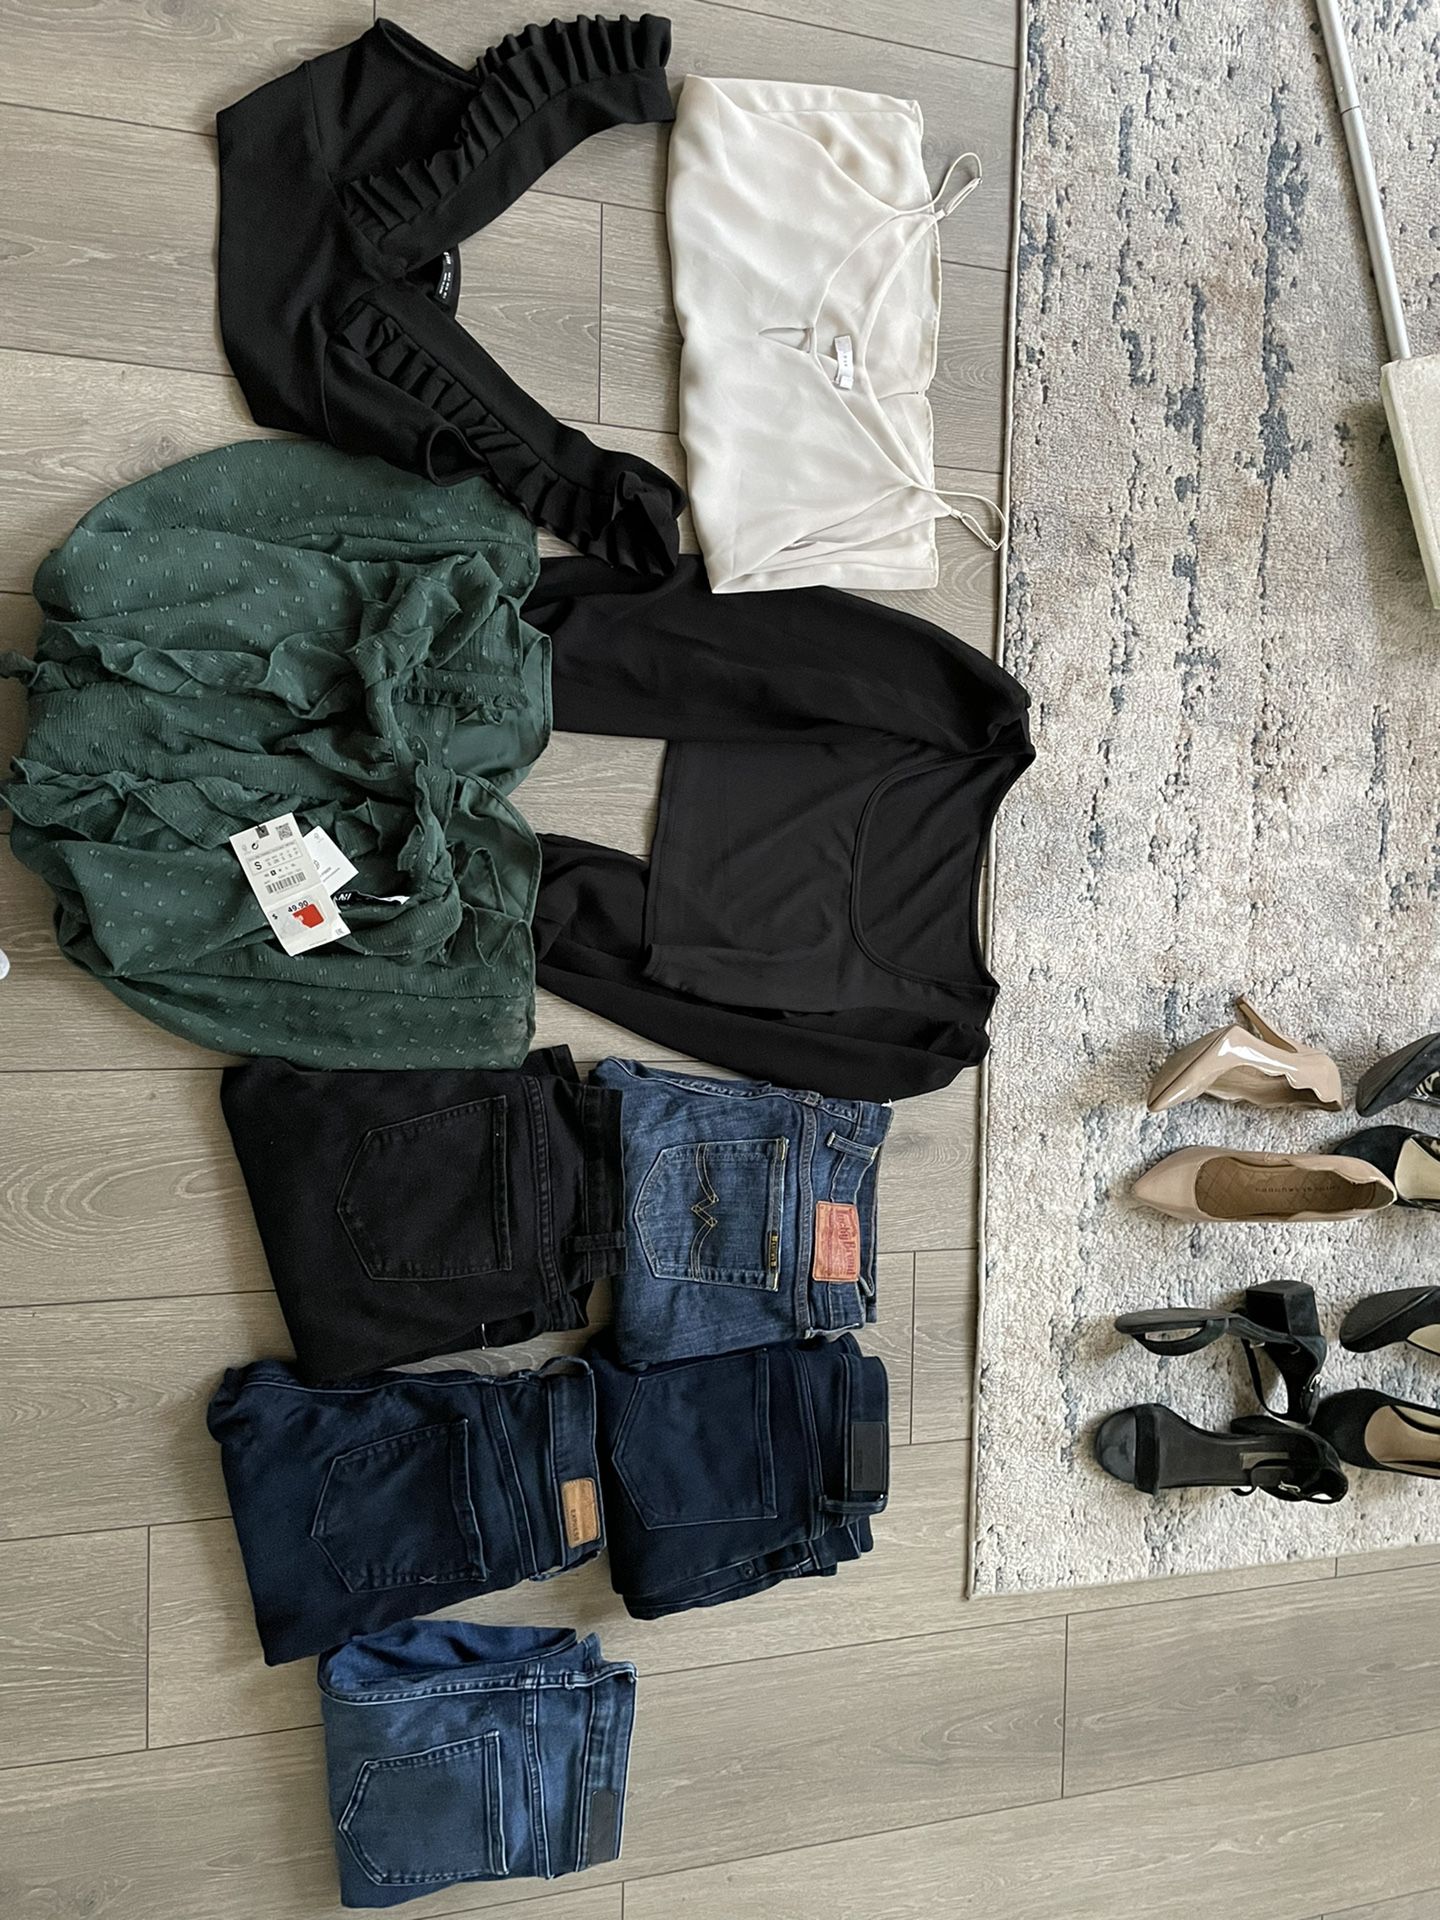 Clothes/shoes Small-Medium. Jeans 2-4. Shoes 7-7.5